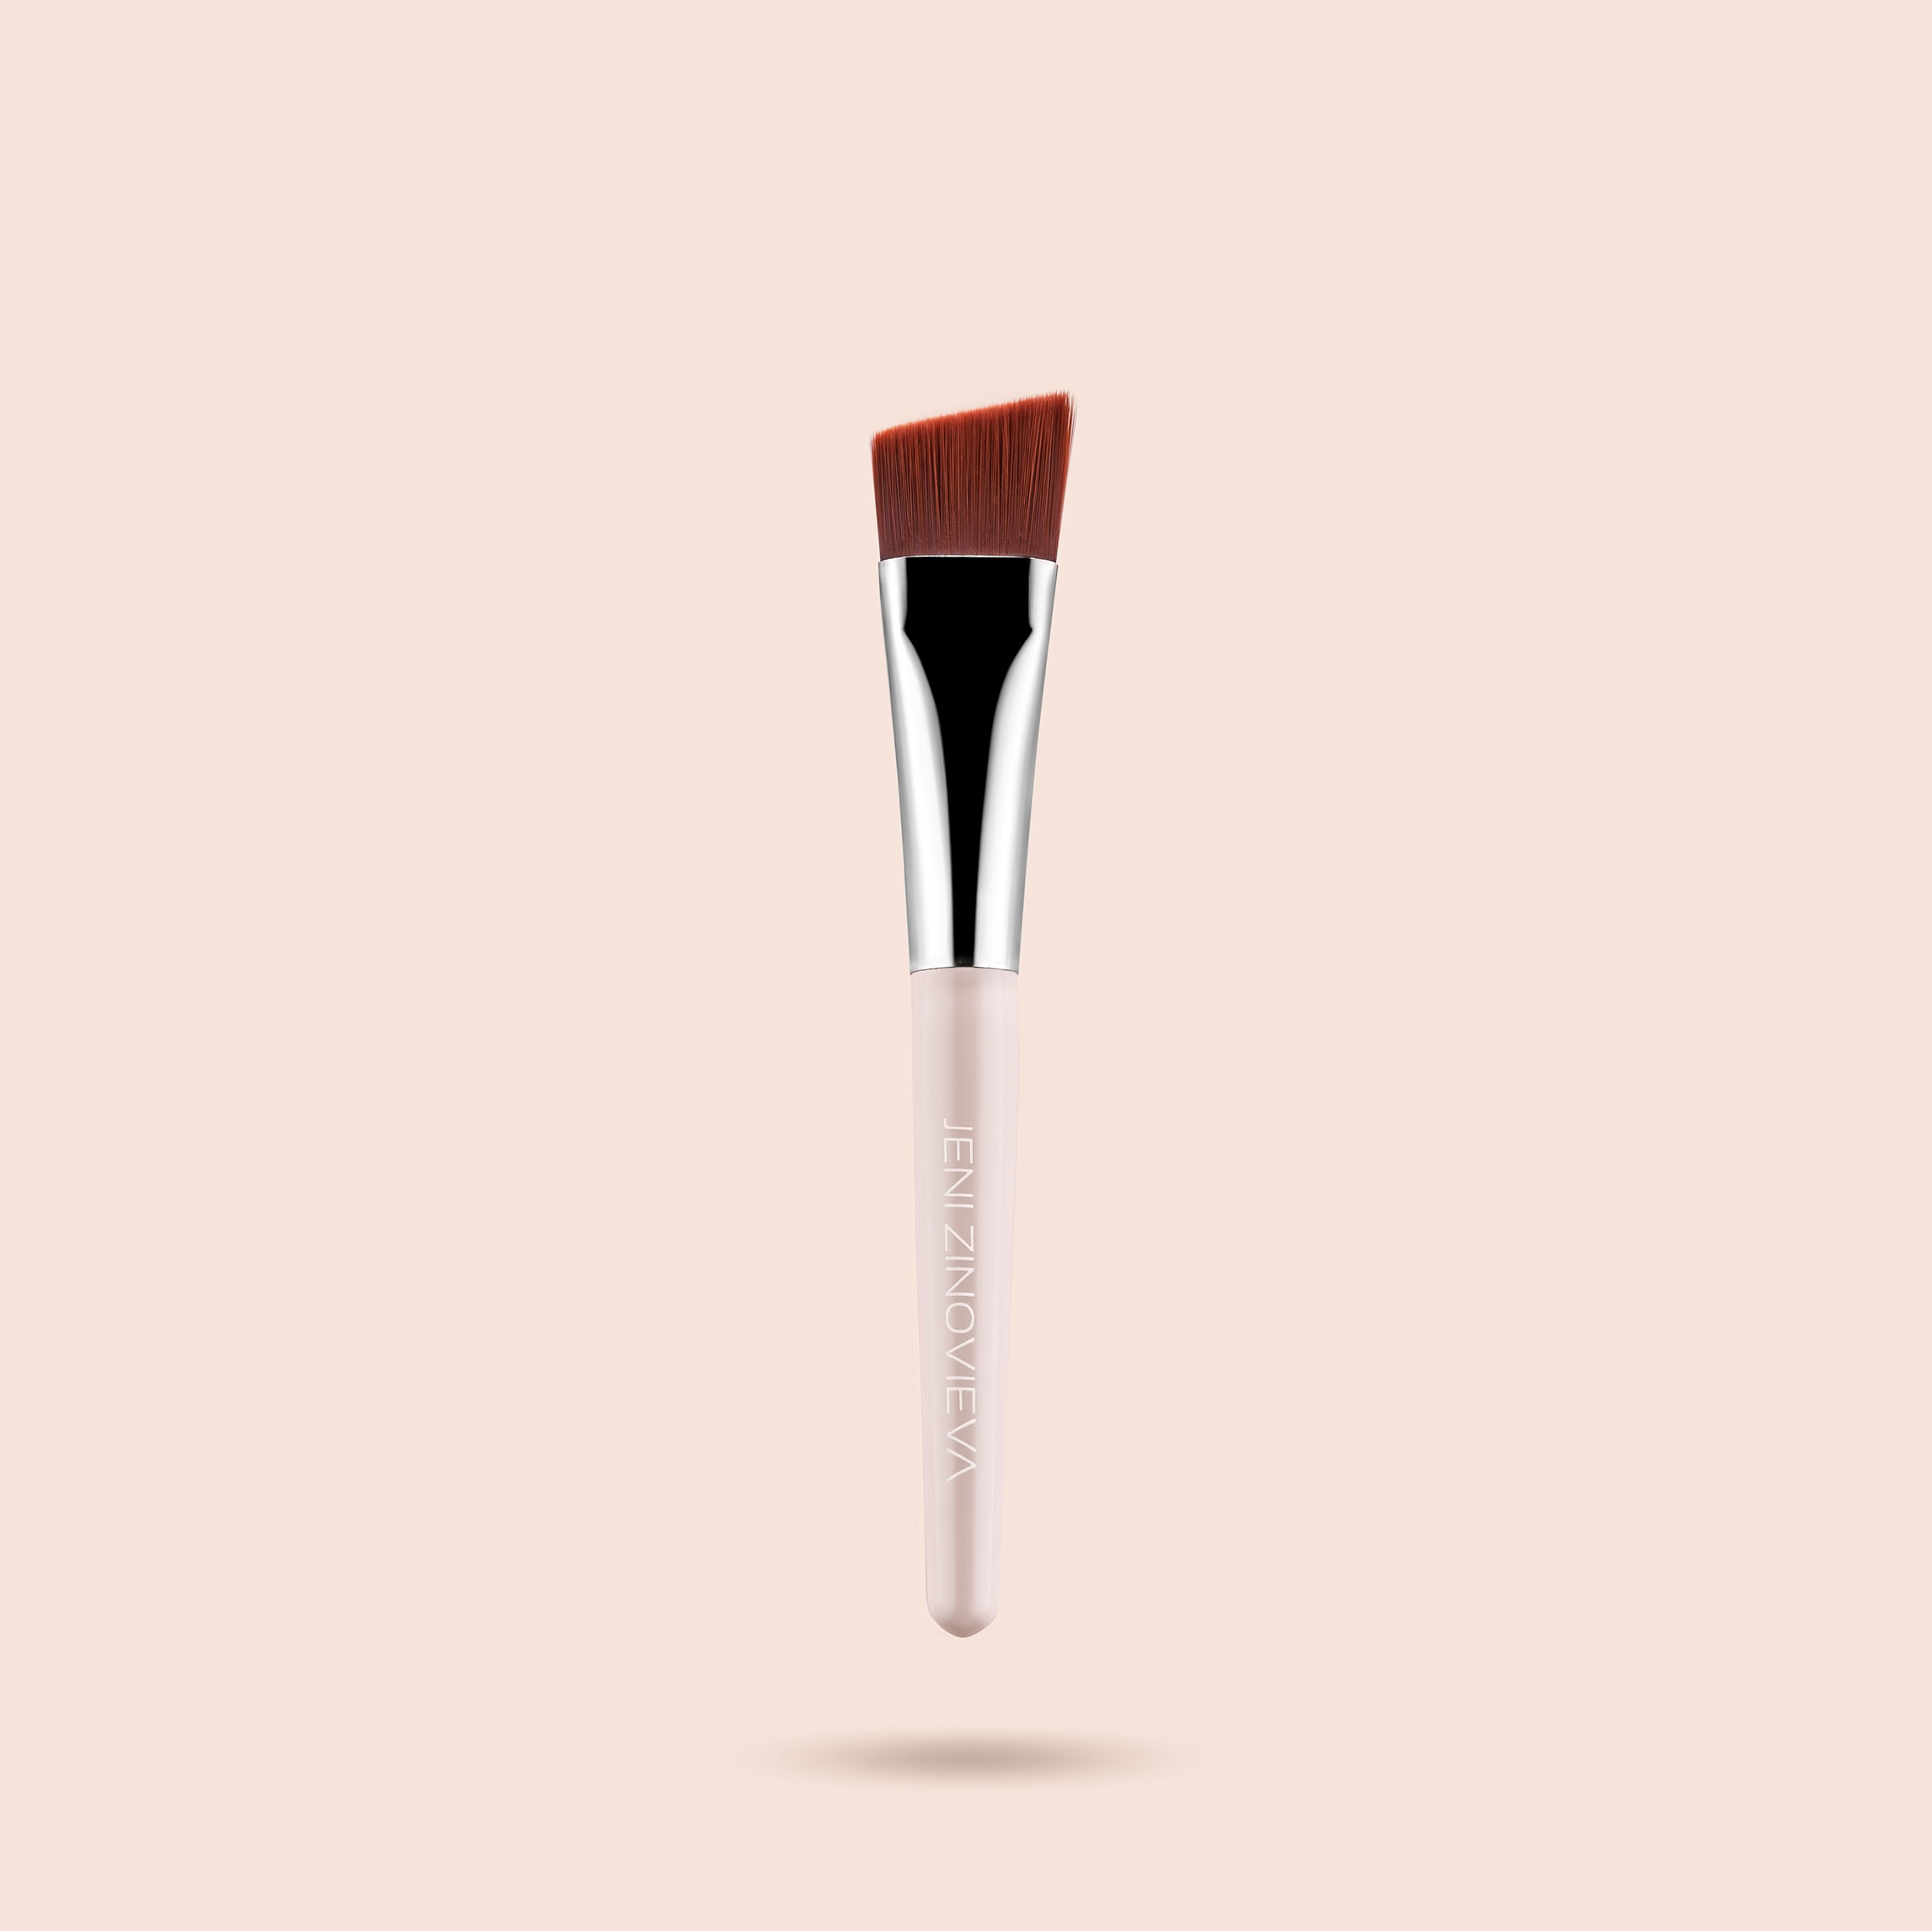 WINGED LINER BRUSH – Dose of Colors